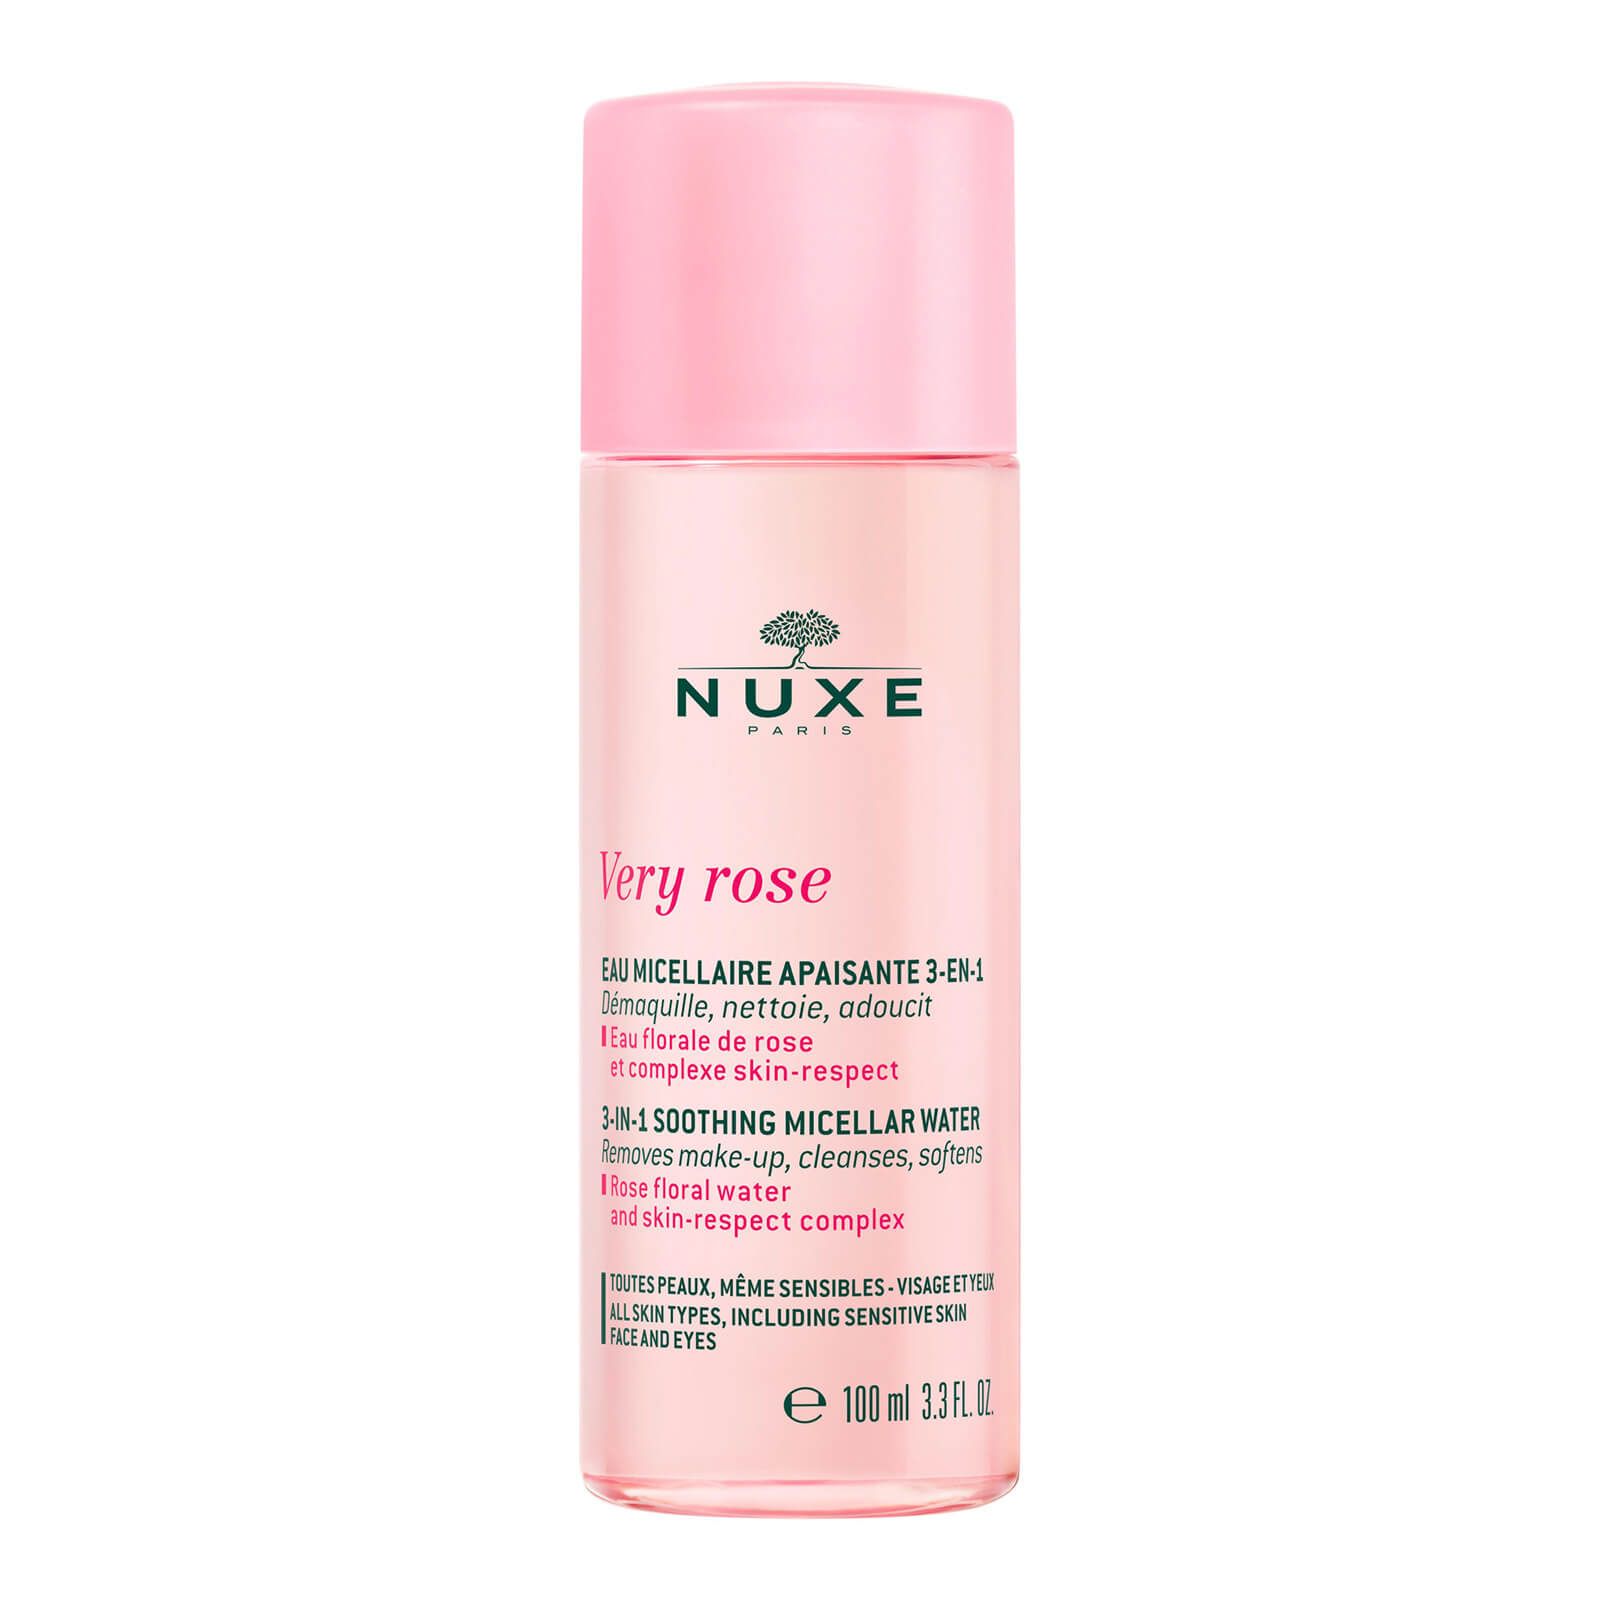 NUXE Travel Size Very Rose 3-in-1 Soothing Micellar Water 100ml von NUXE